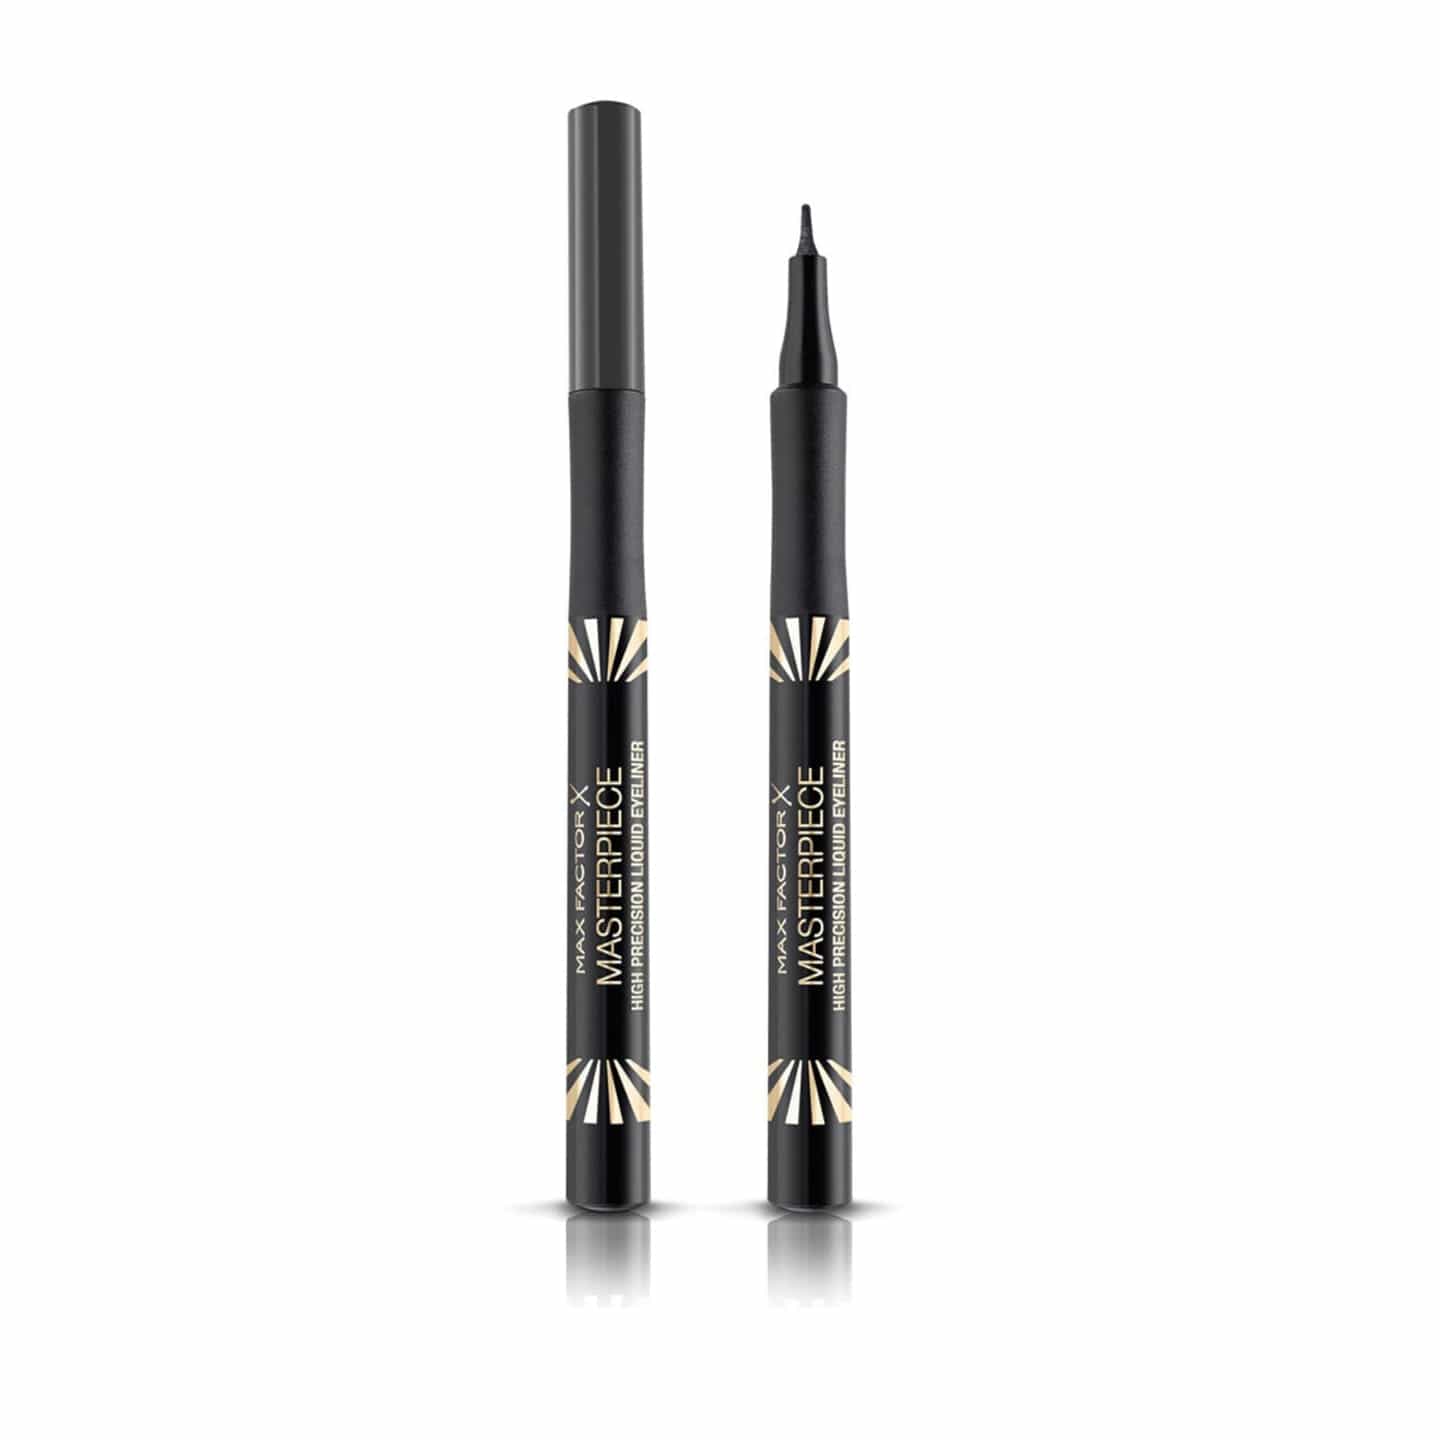 Masterpiece High Precision Liquid Eye Liner | Max Factor - Give Us Beauty